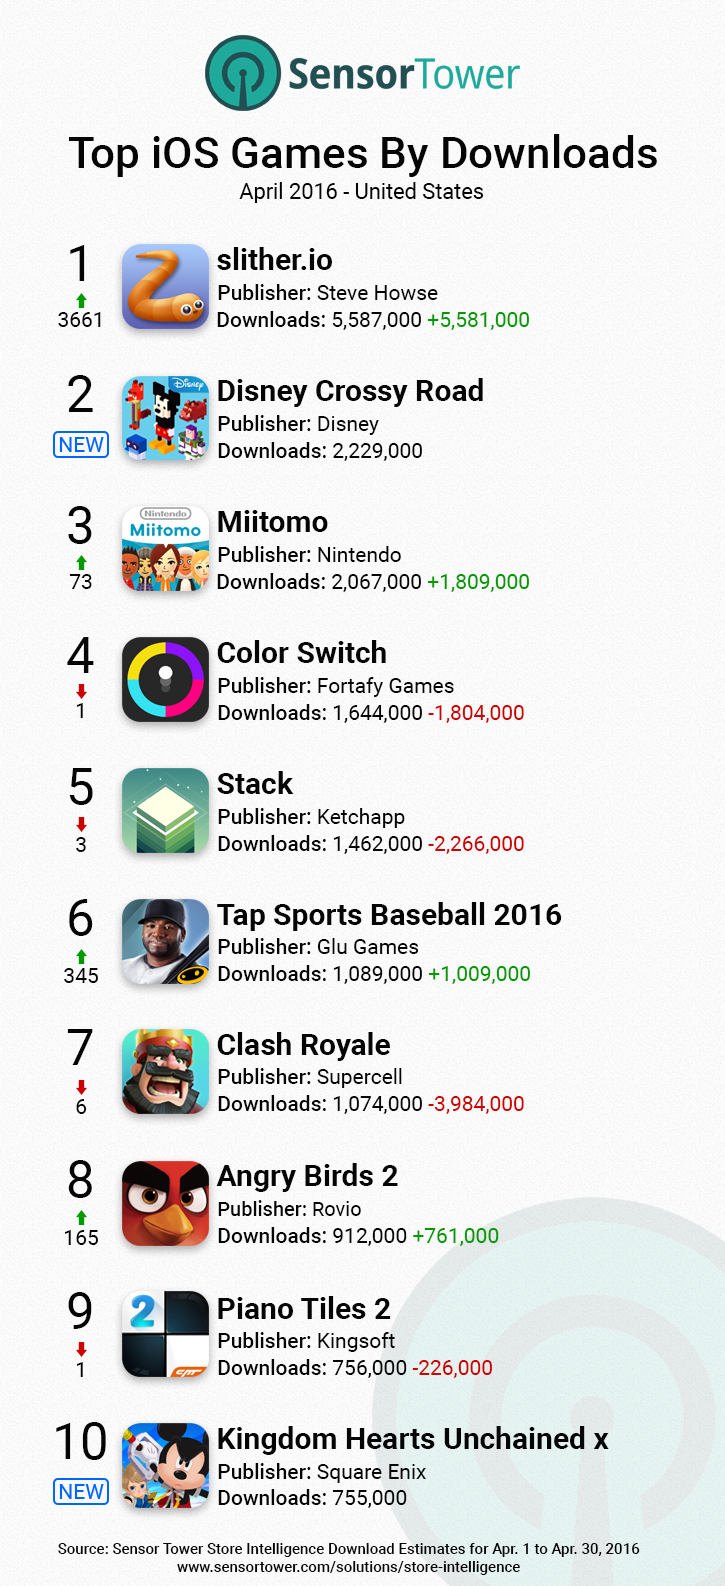 iOS Games Top Downloads United States April 2016